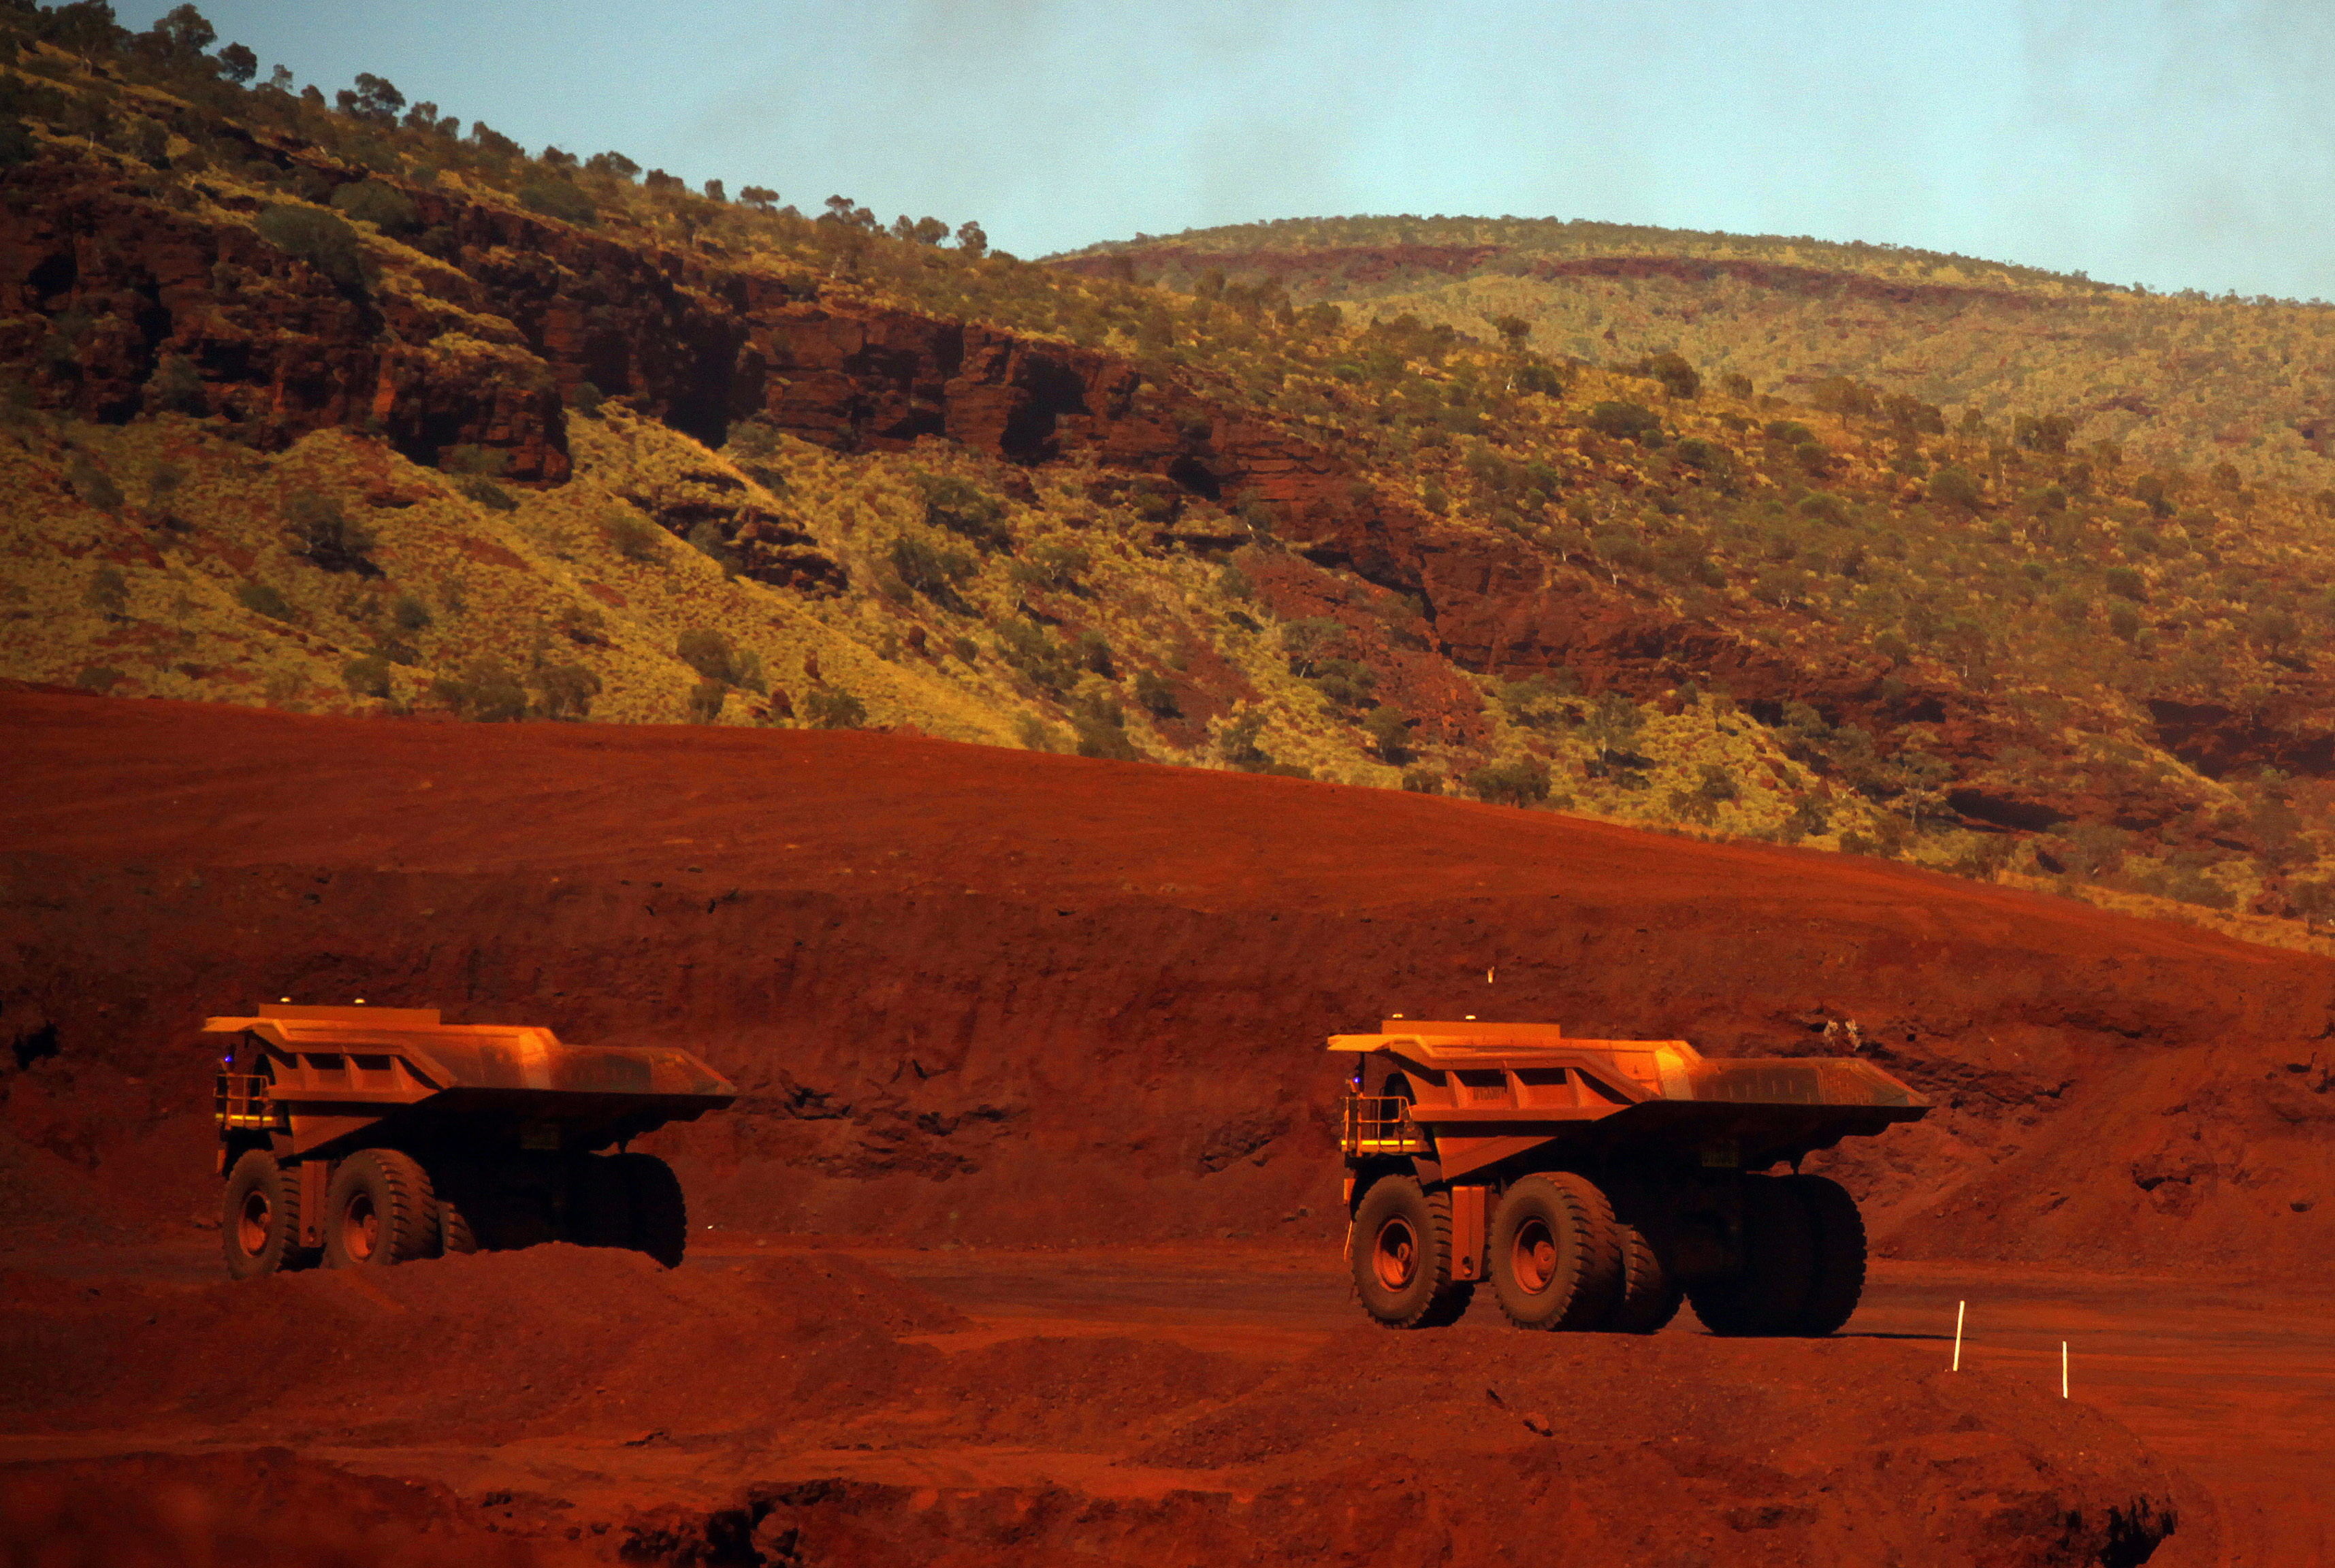 Trucks wait to be loaded with iron ore at the Fortescue Solomon iron ore mine located in the Valley of the Kings